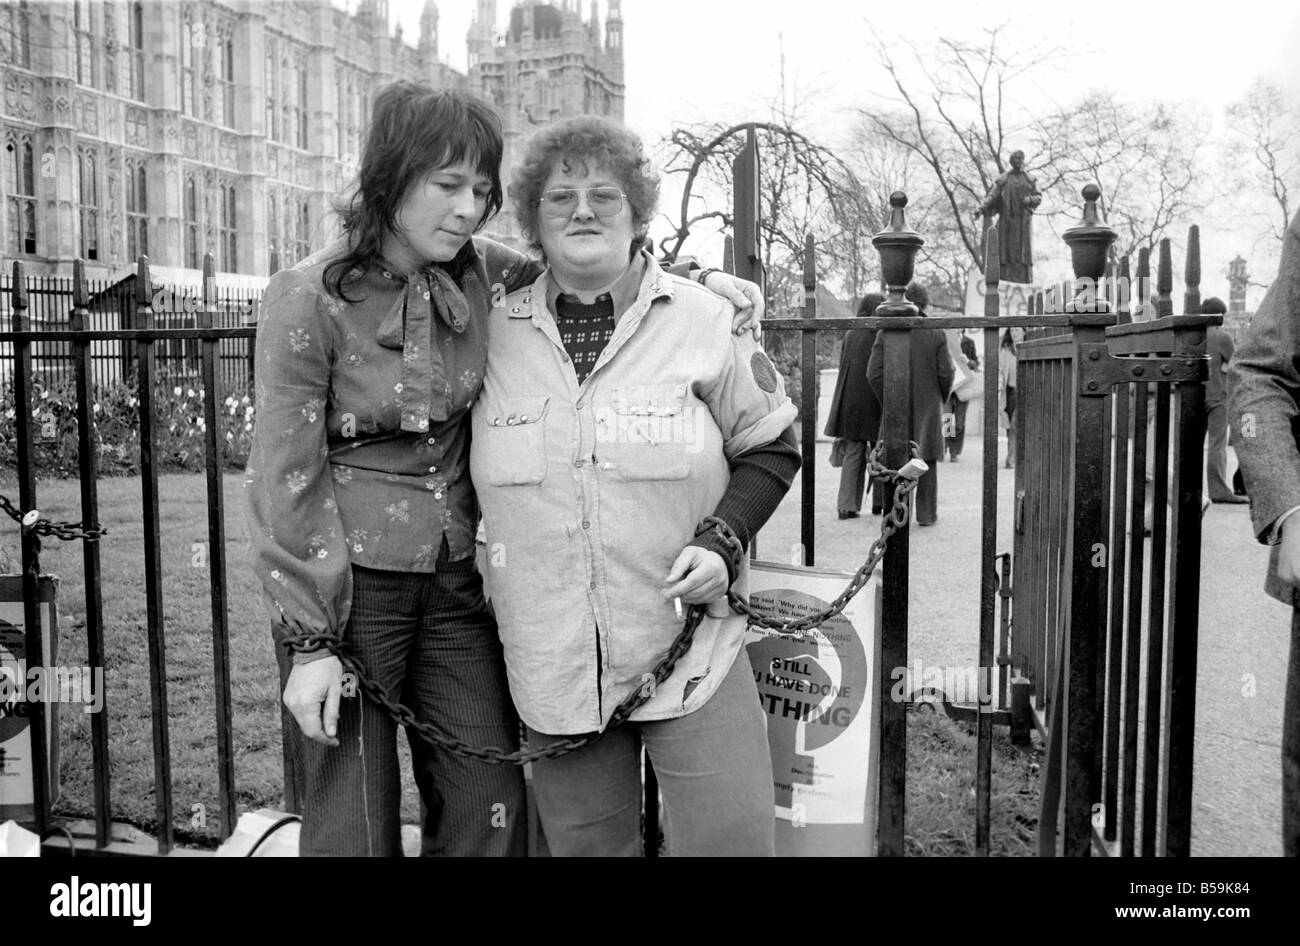 Members of the Womens Liberation Movement chained themselves to the railings at the statue of Sylvia Pankhurst. Police with bolt cutters cut away the protesters from the railings. ;April 1975 ;75-2043-009 Stock Photo